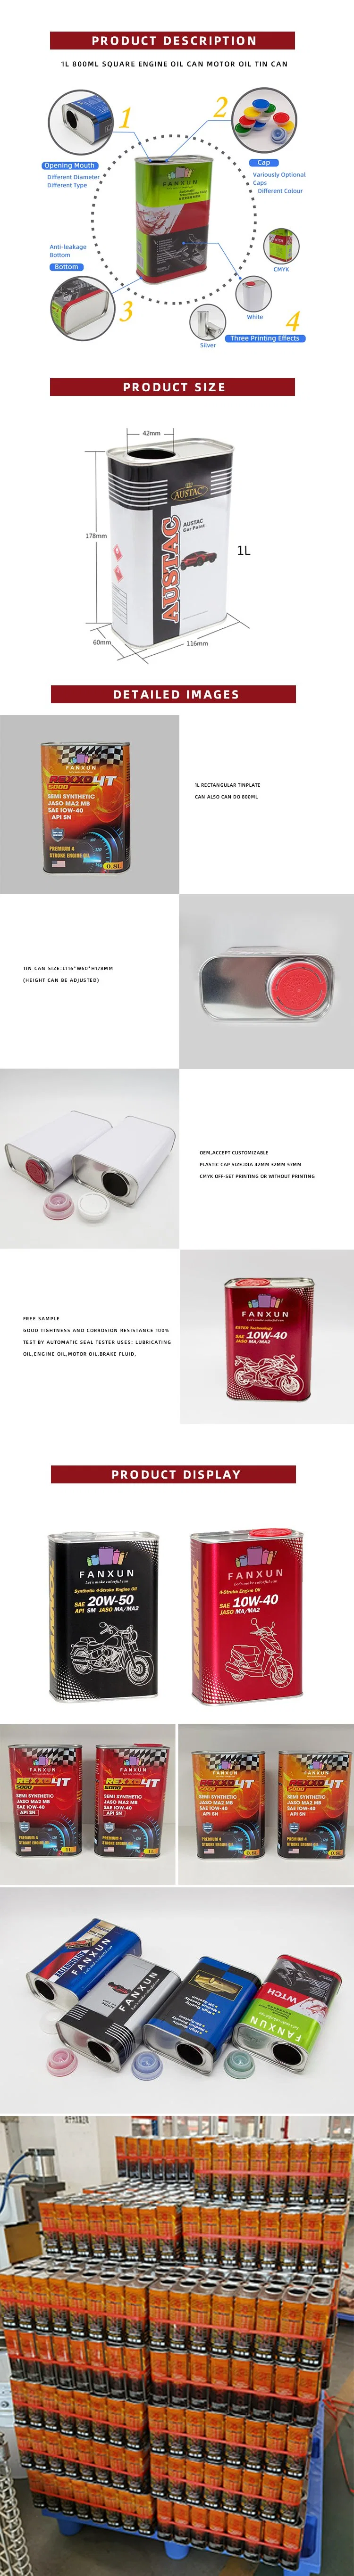 1 Litre Square Paint Tin Can 1L Rectangular Metal Cans for Car Paint Packaging